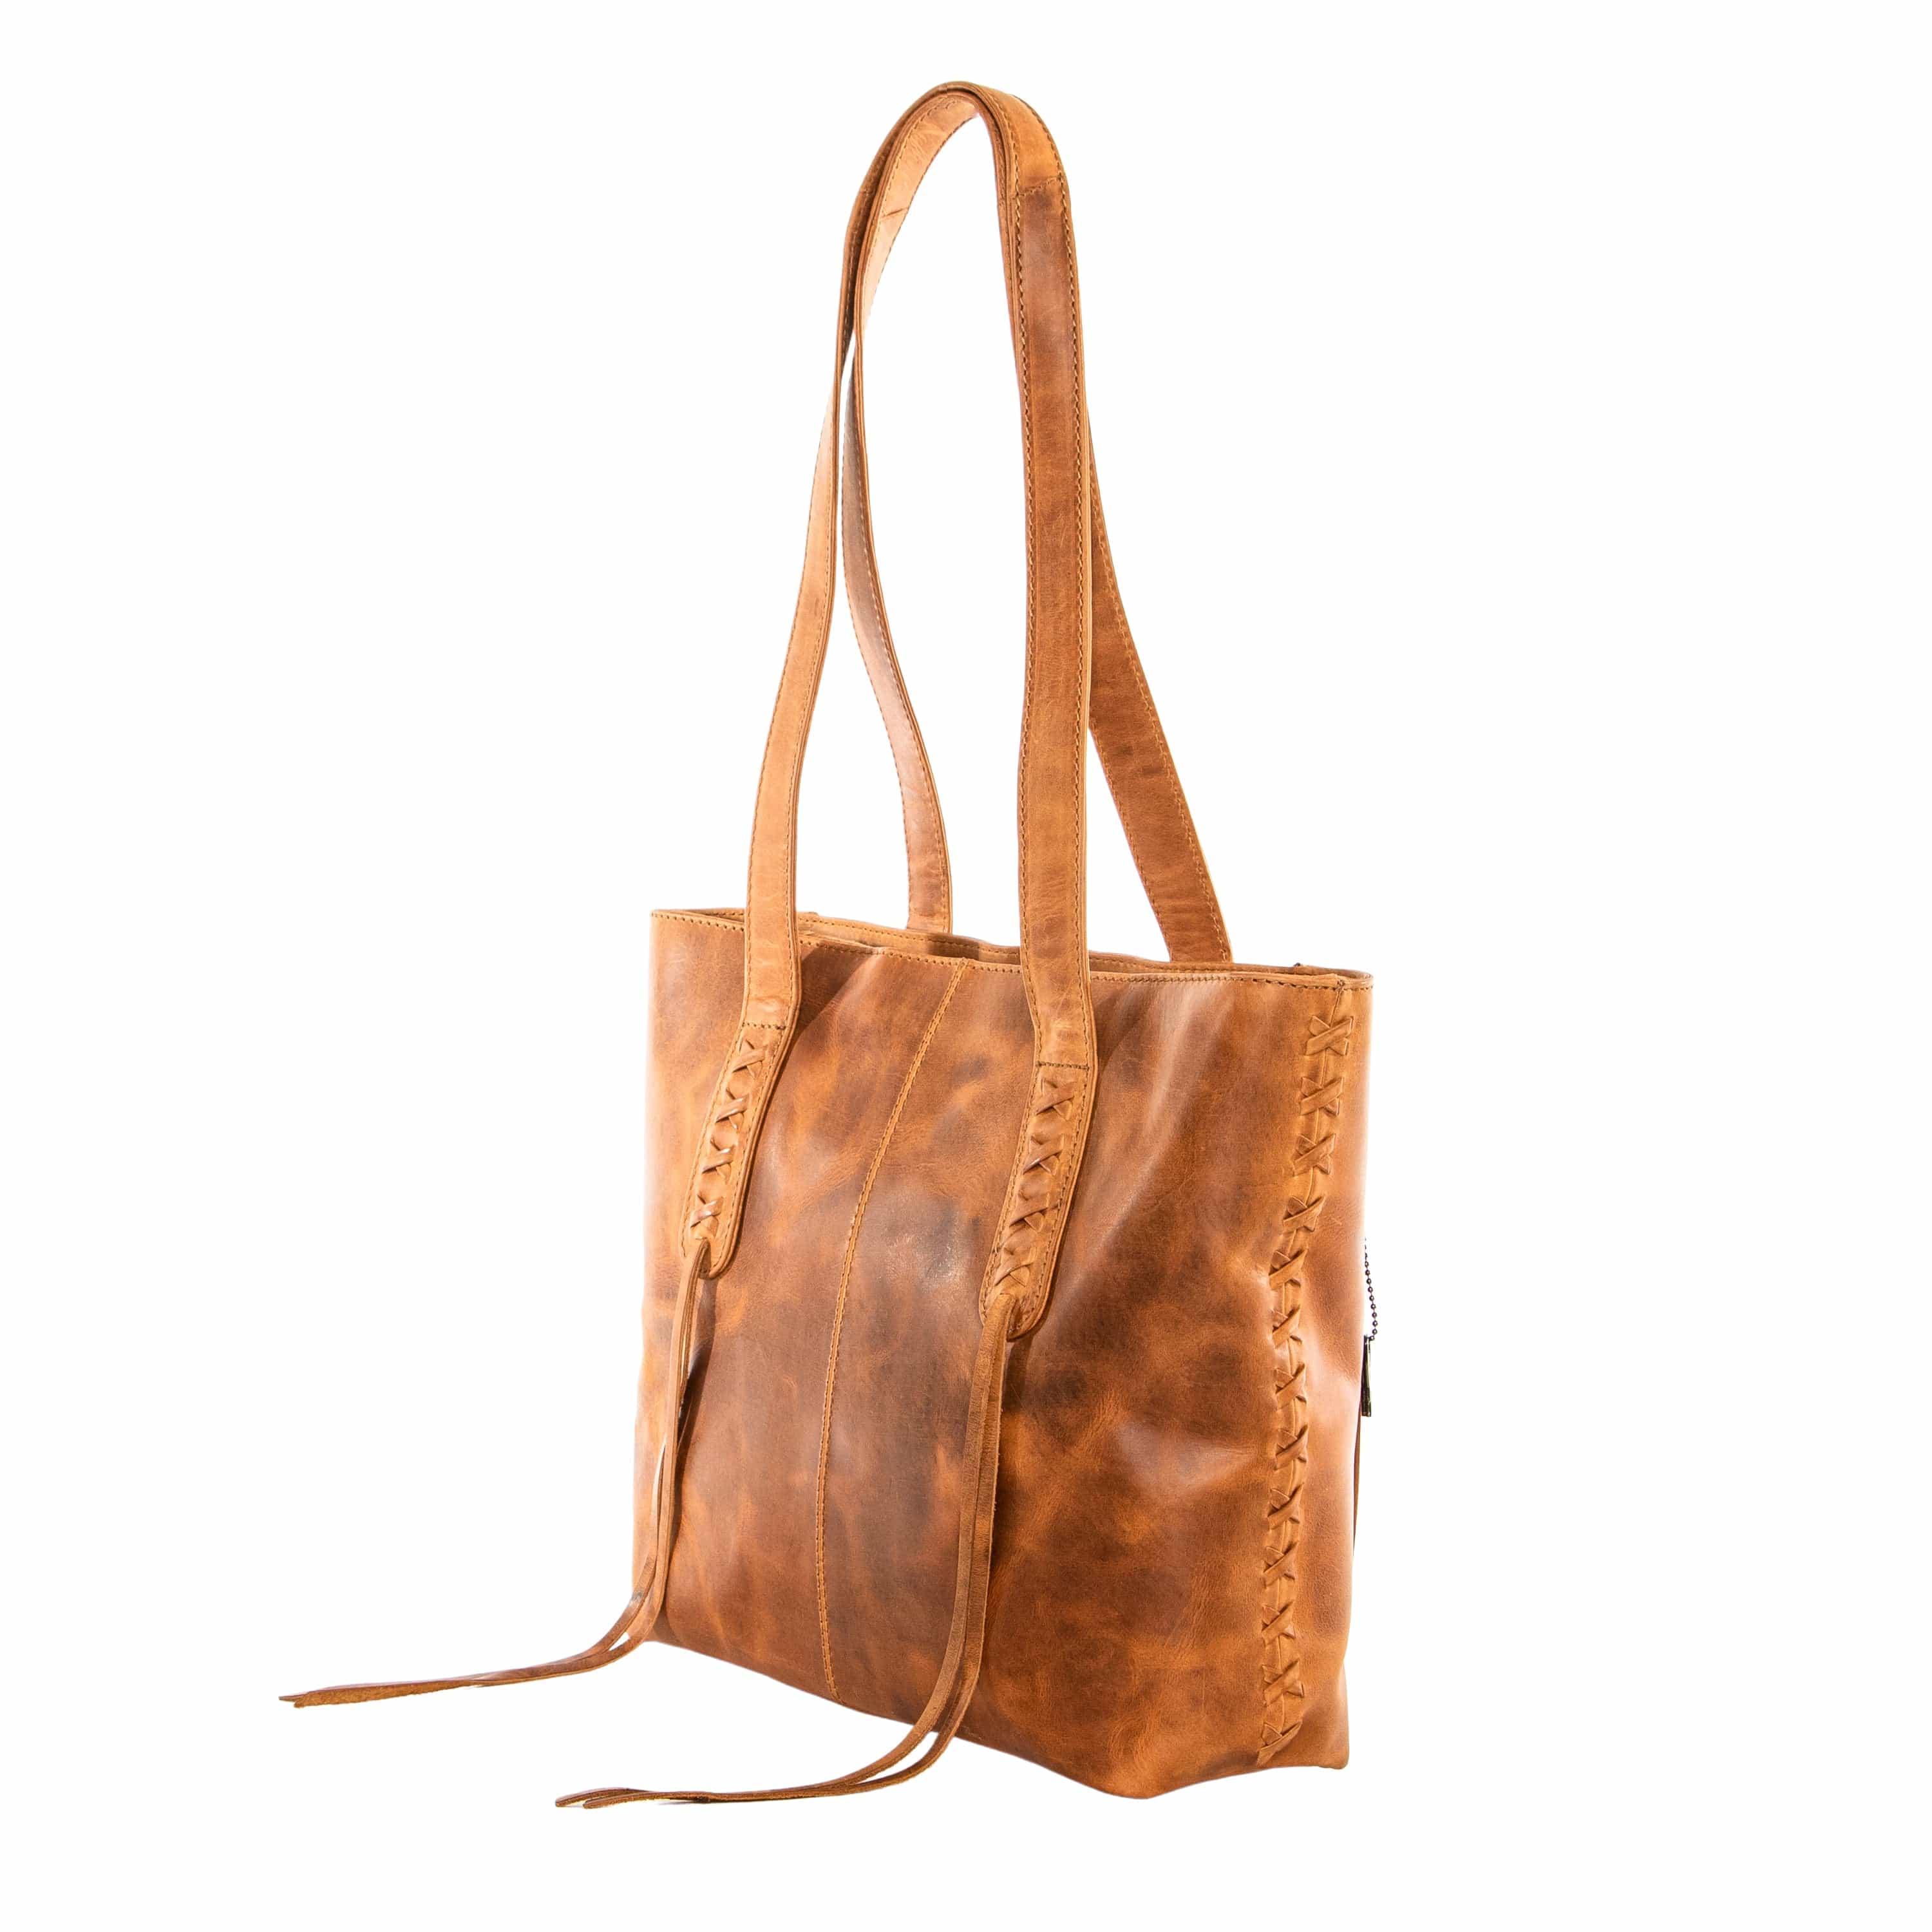 Concealed Carry Reagan Medium Leather Tote -  Lady Conceal -  Concealed Carry Purse -  Designer Luxury Leather Carry Handbag -  carry Handbag for gun carry -  Unique Tote gun Handbag -  designer backpack purse -  designer purse sale -  designer purse sales -  womens designer purse sale -  Reagan Medium Leather Tote -  designer lady purse concealed carry gun Handbag -   concealed carry Handbag for woman-  Easy Conceal Carry and Draw Purse -